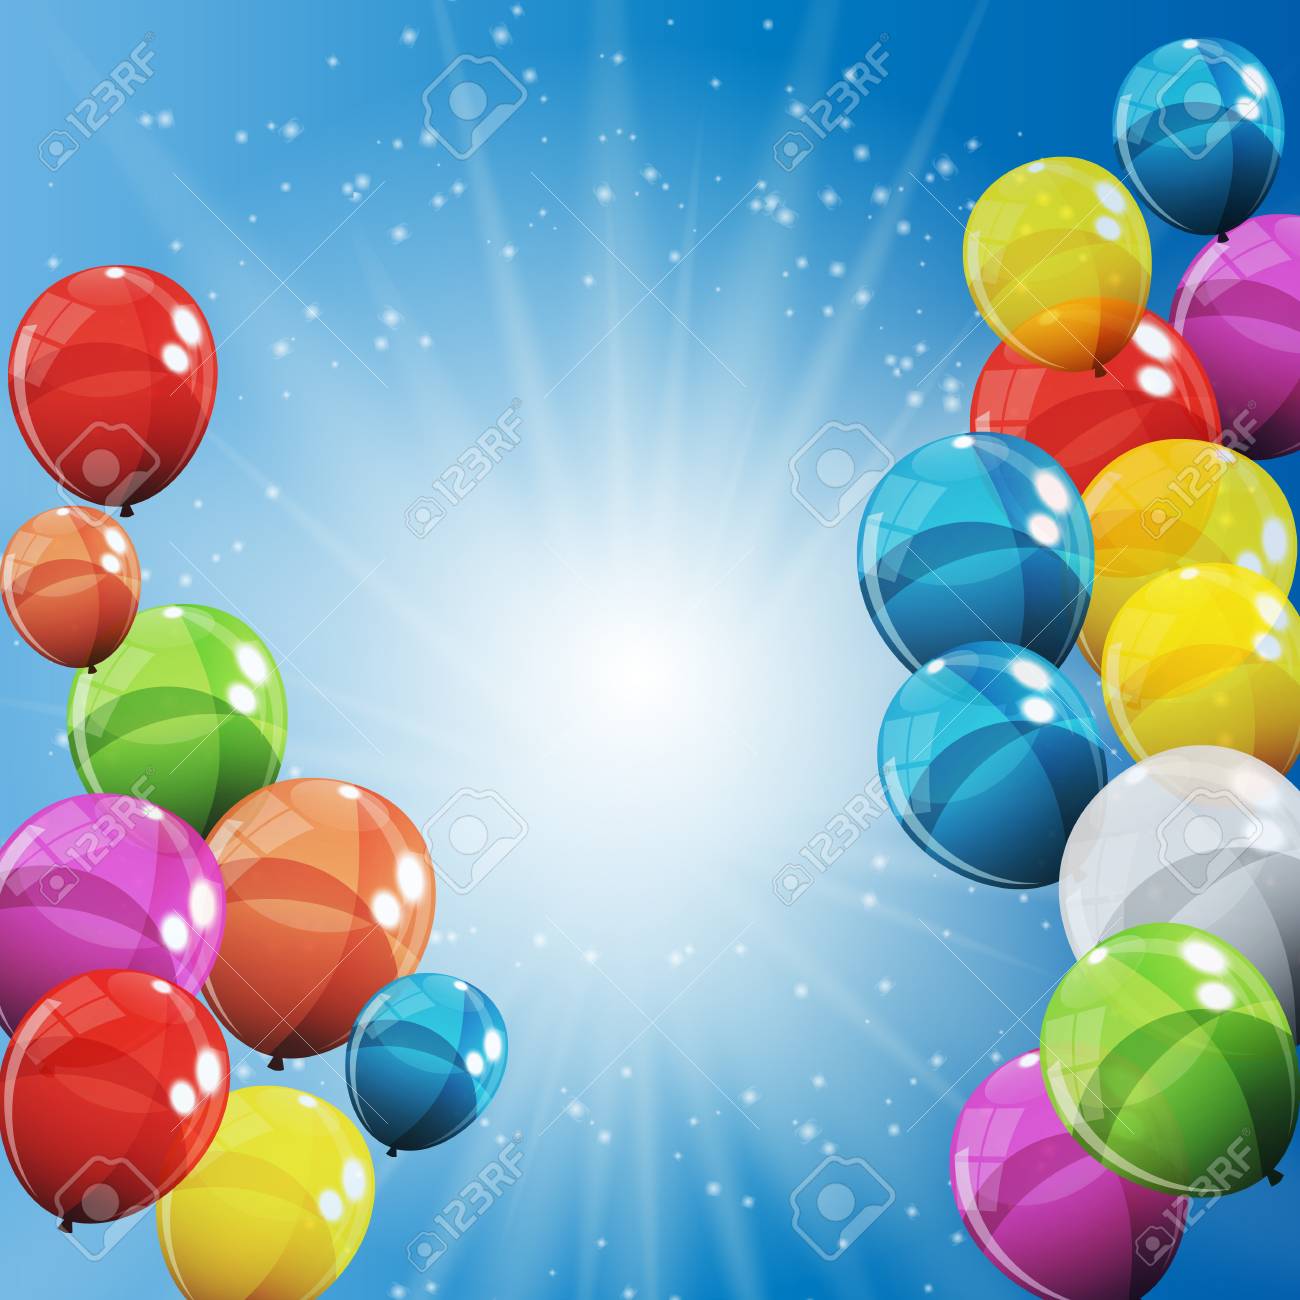 Group Of Colour Glossy Helium Balloons Background Set